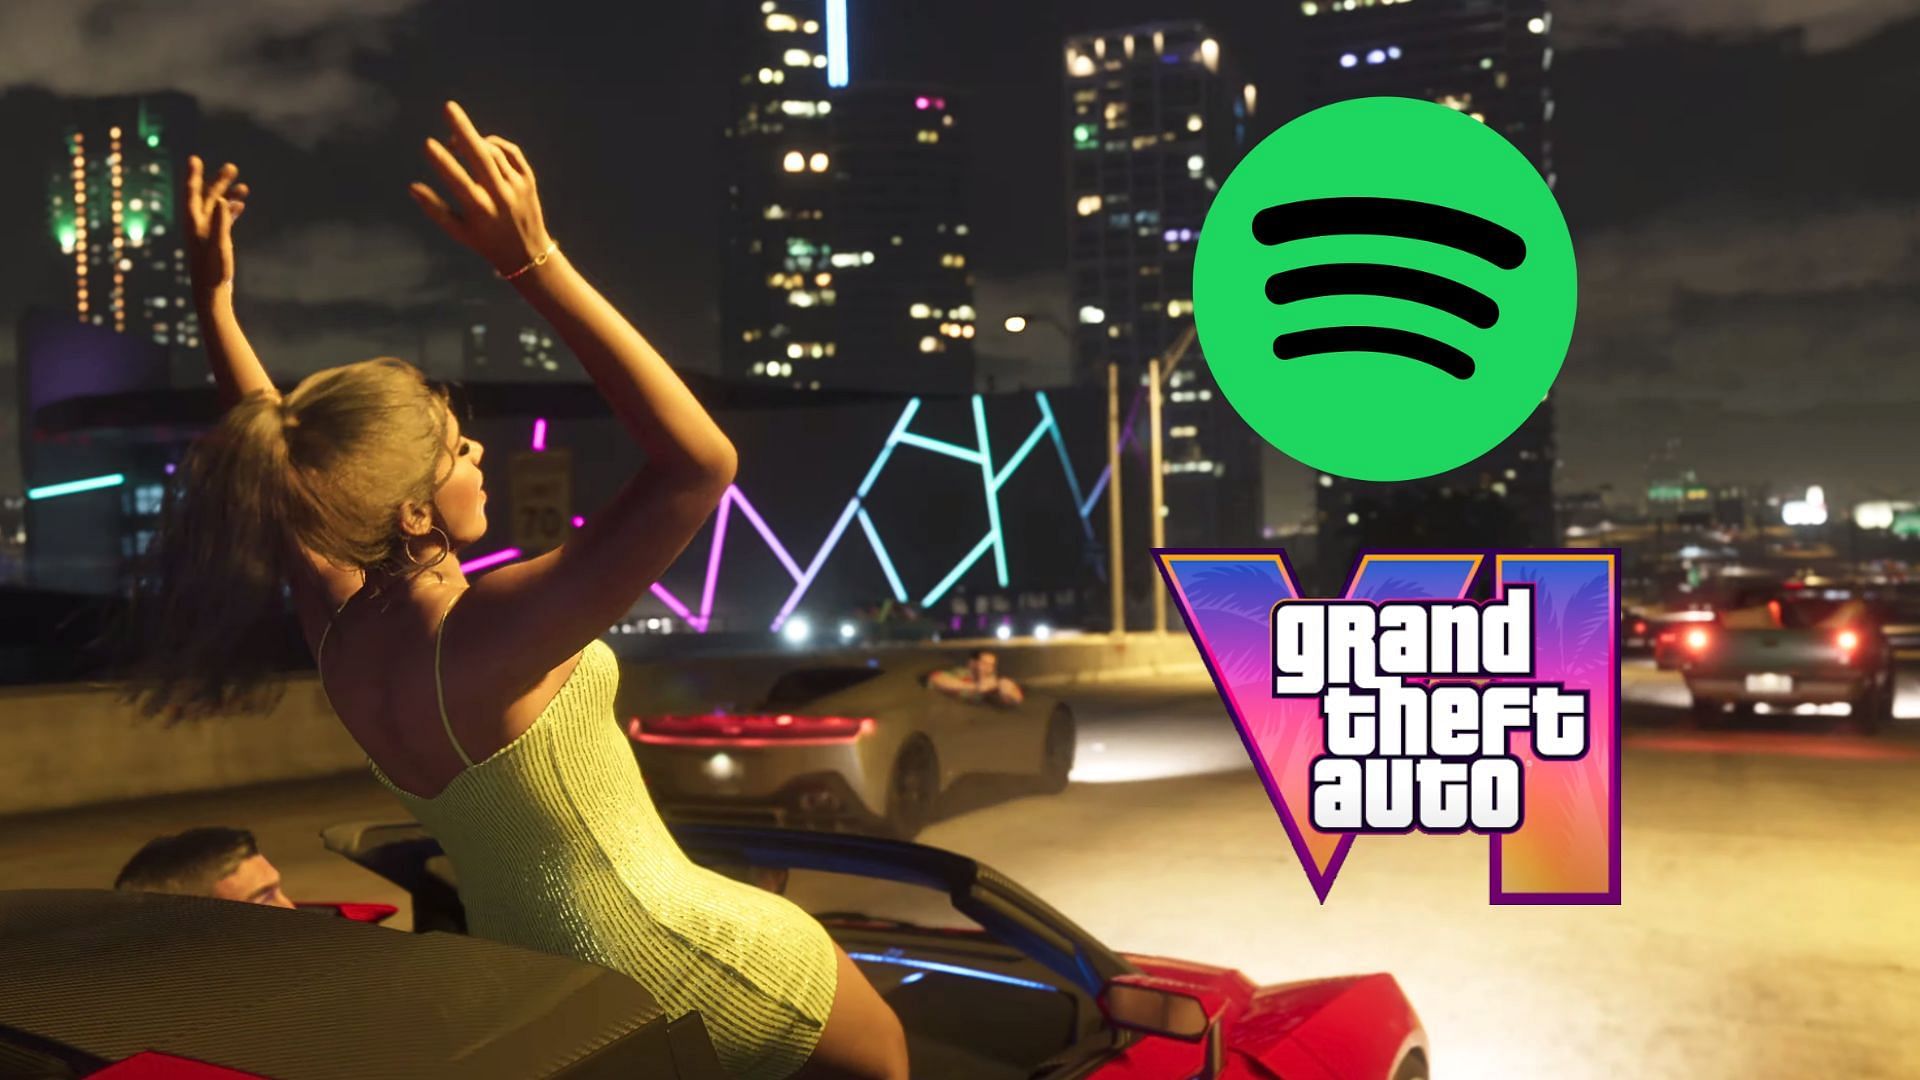 The GTA 6 trailer song is one of the most streamed songs in recent times (Image via Rockstar Games, Sportskeeda)